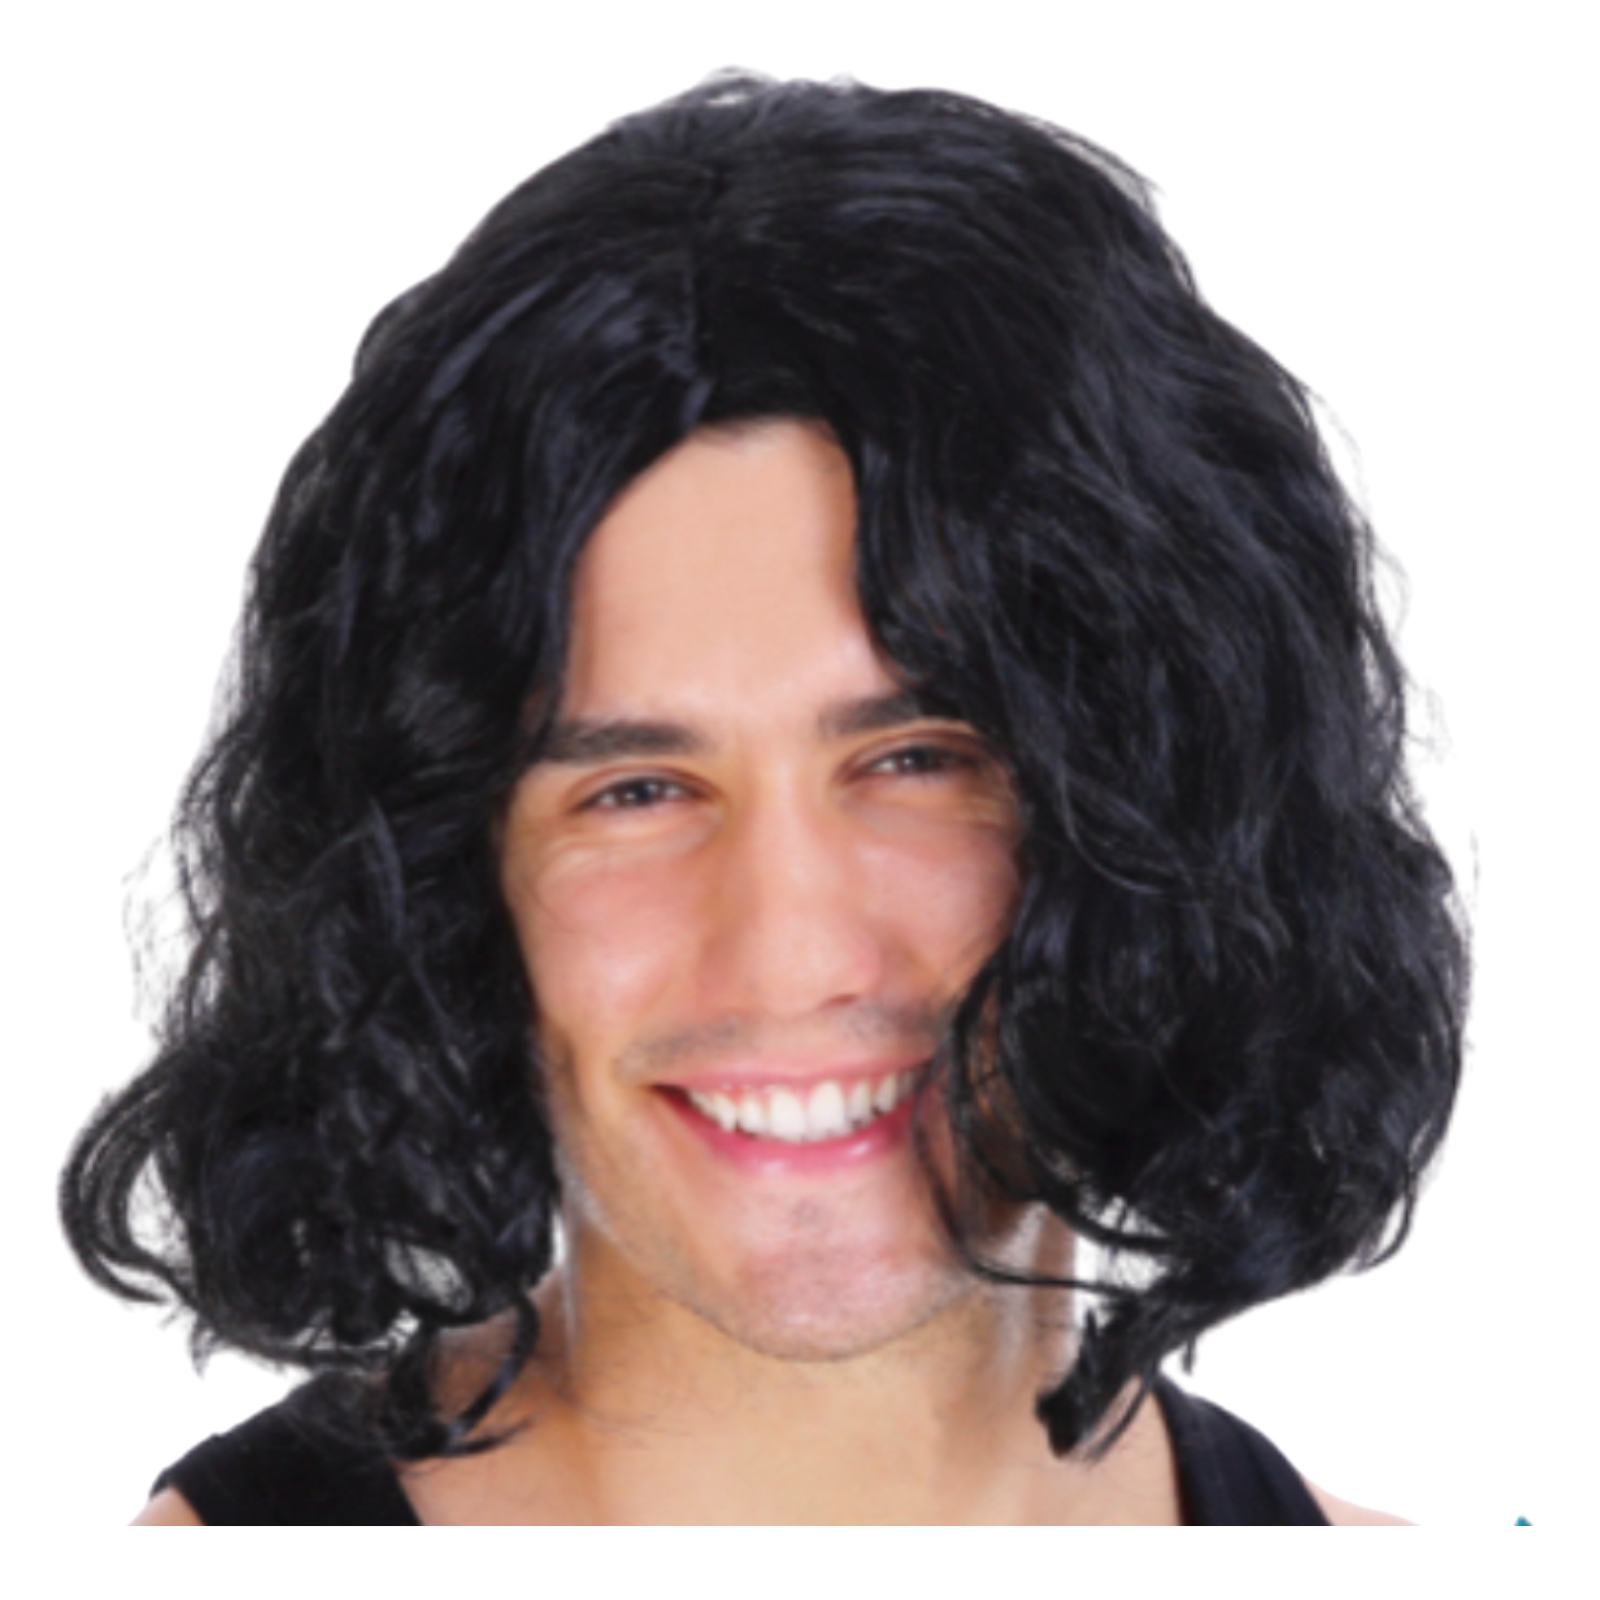 MENS WAVY WIG Curly Long Hair Disco Punk Rock Party Costume 60s 70s